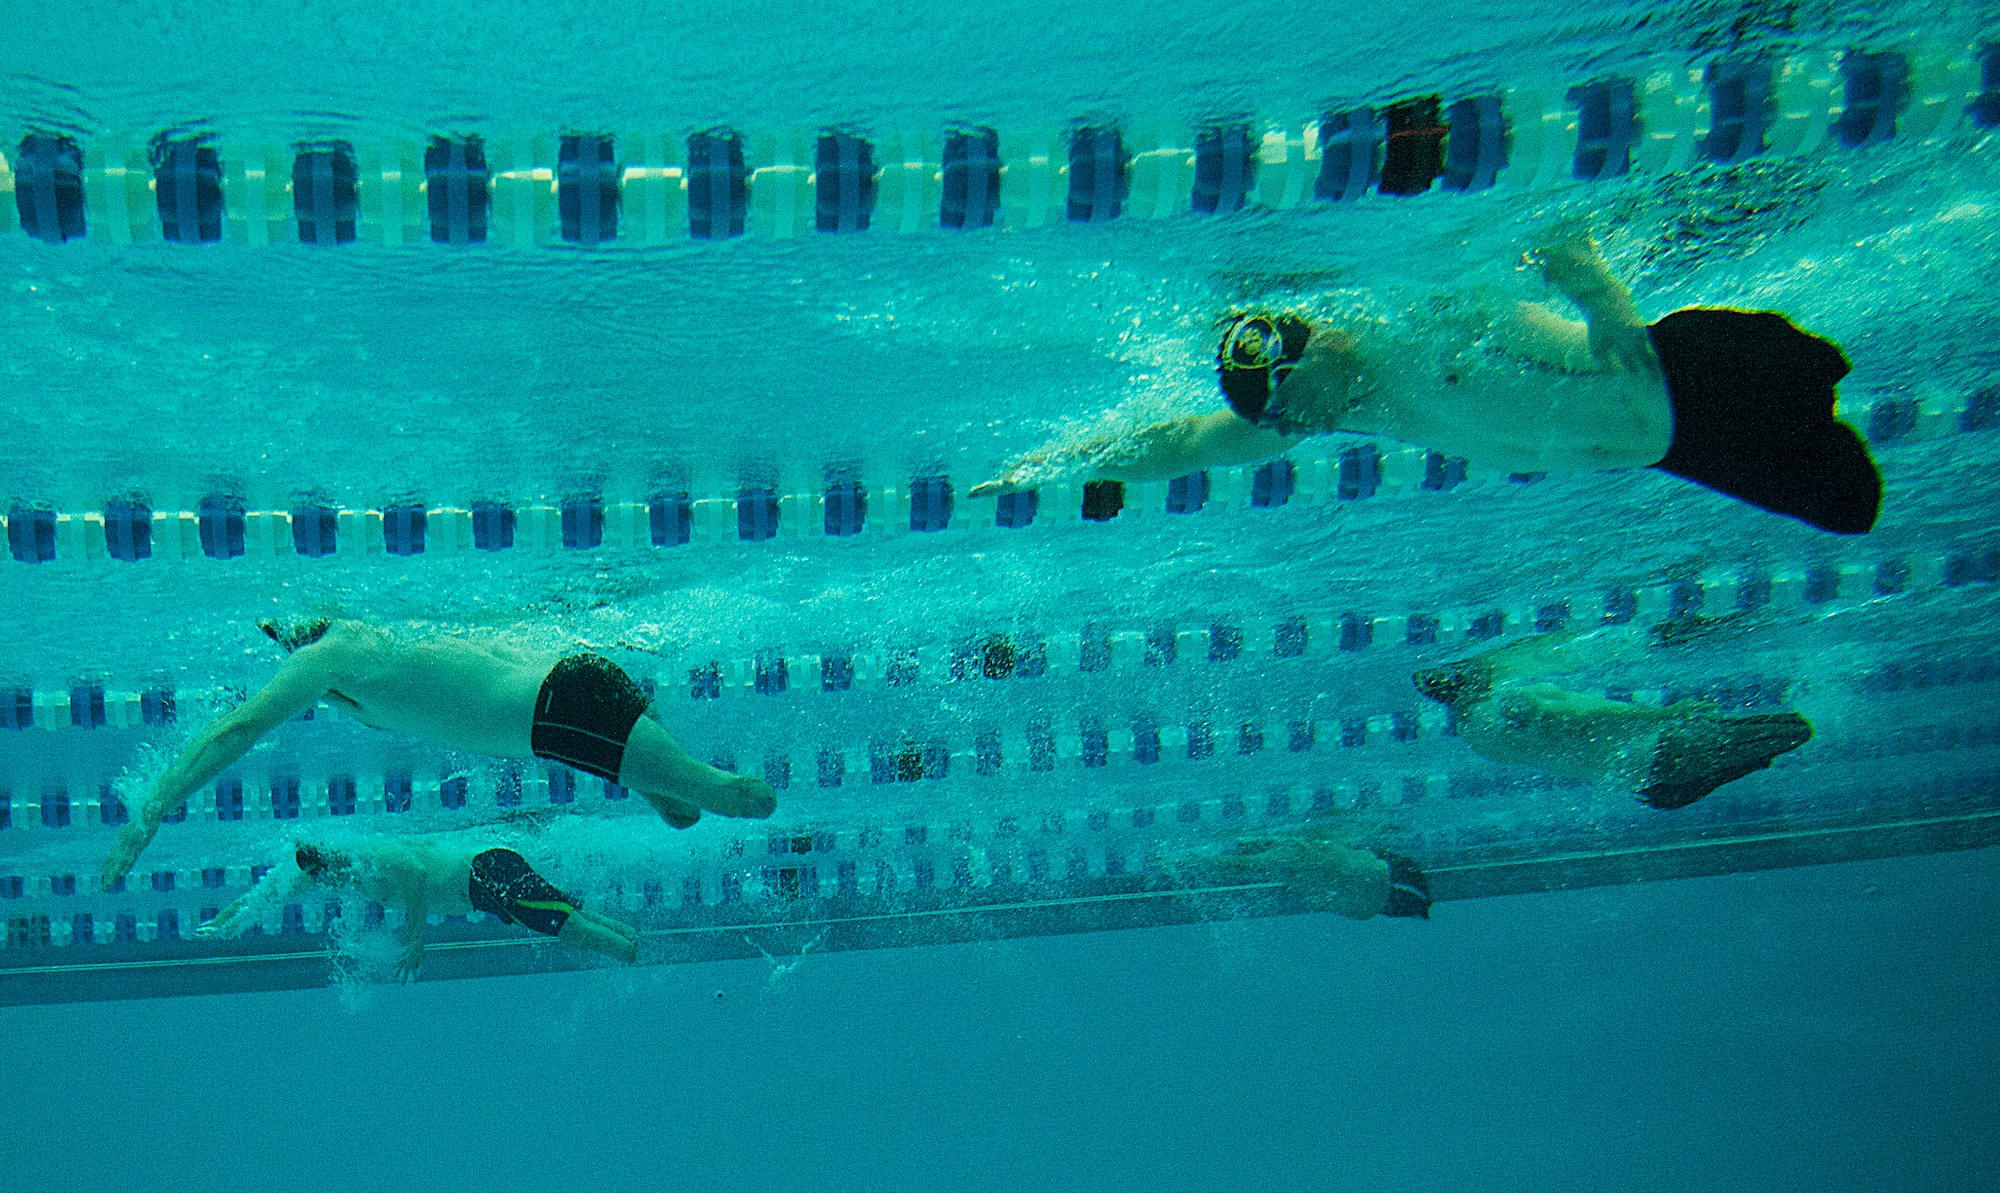 Athletes take part in a swimming competition during Warrior Games 2012 at the U.S. Air Force Academy in Colorado Springs, Colo., May 5, 2012. (U.S. Air Force photo by Val Gempis/Released)